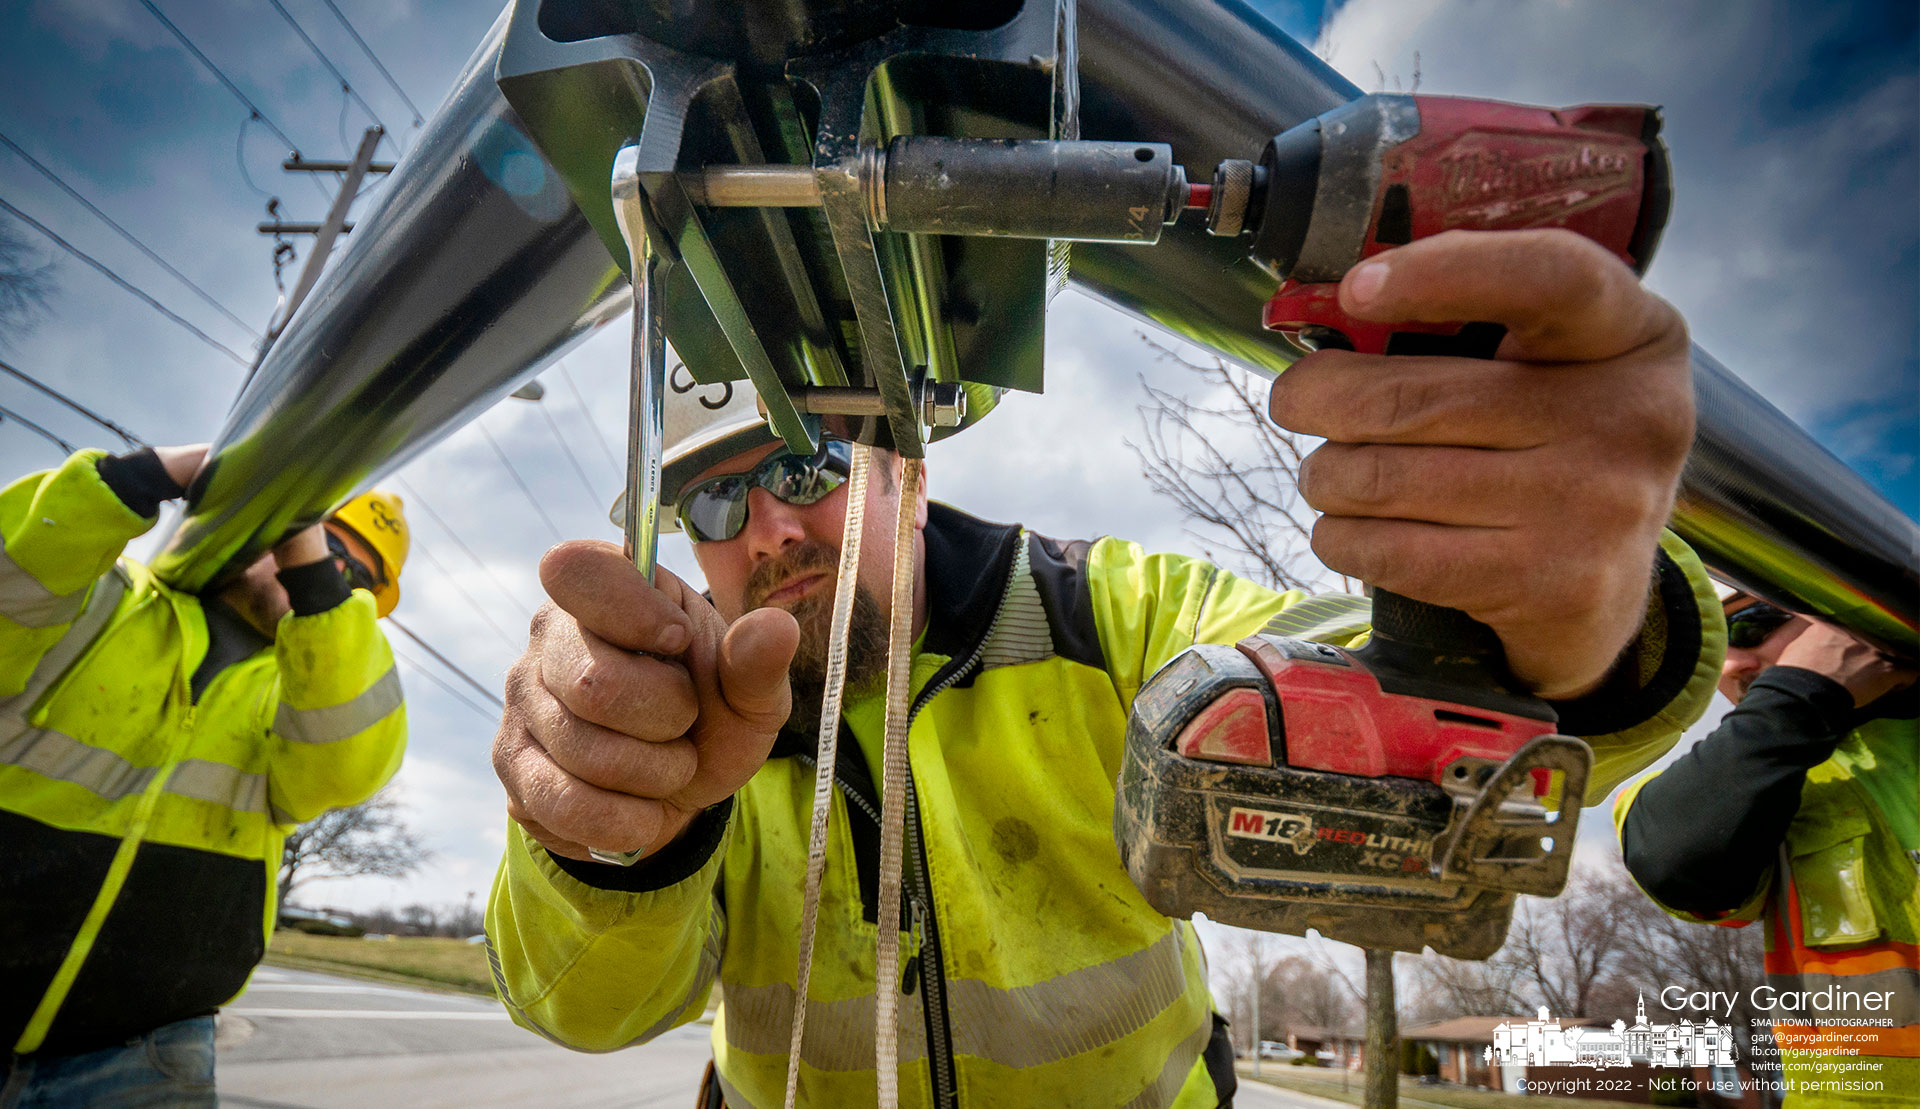 A workman tightens bolts that fasten arms holding new led streetlights in the median on Huber Village Boulevard replacing the old lights. My Final Photo for March 10, 2022.